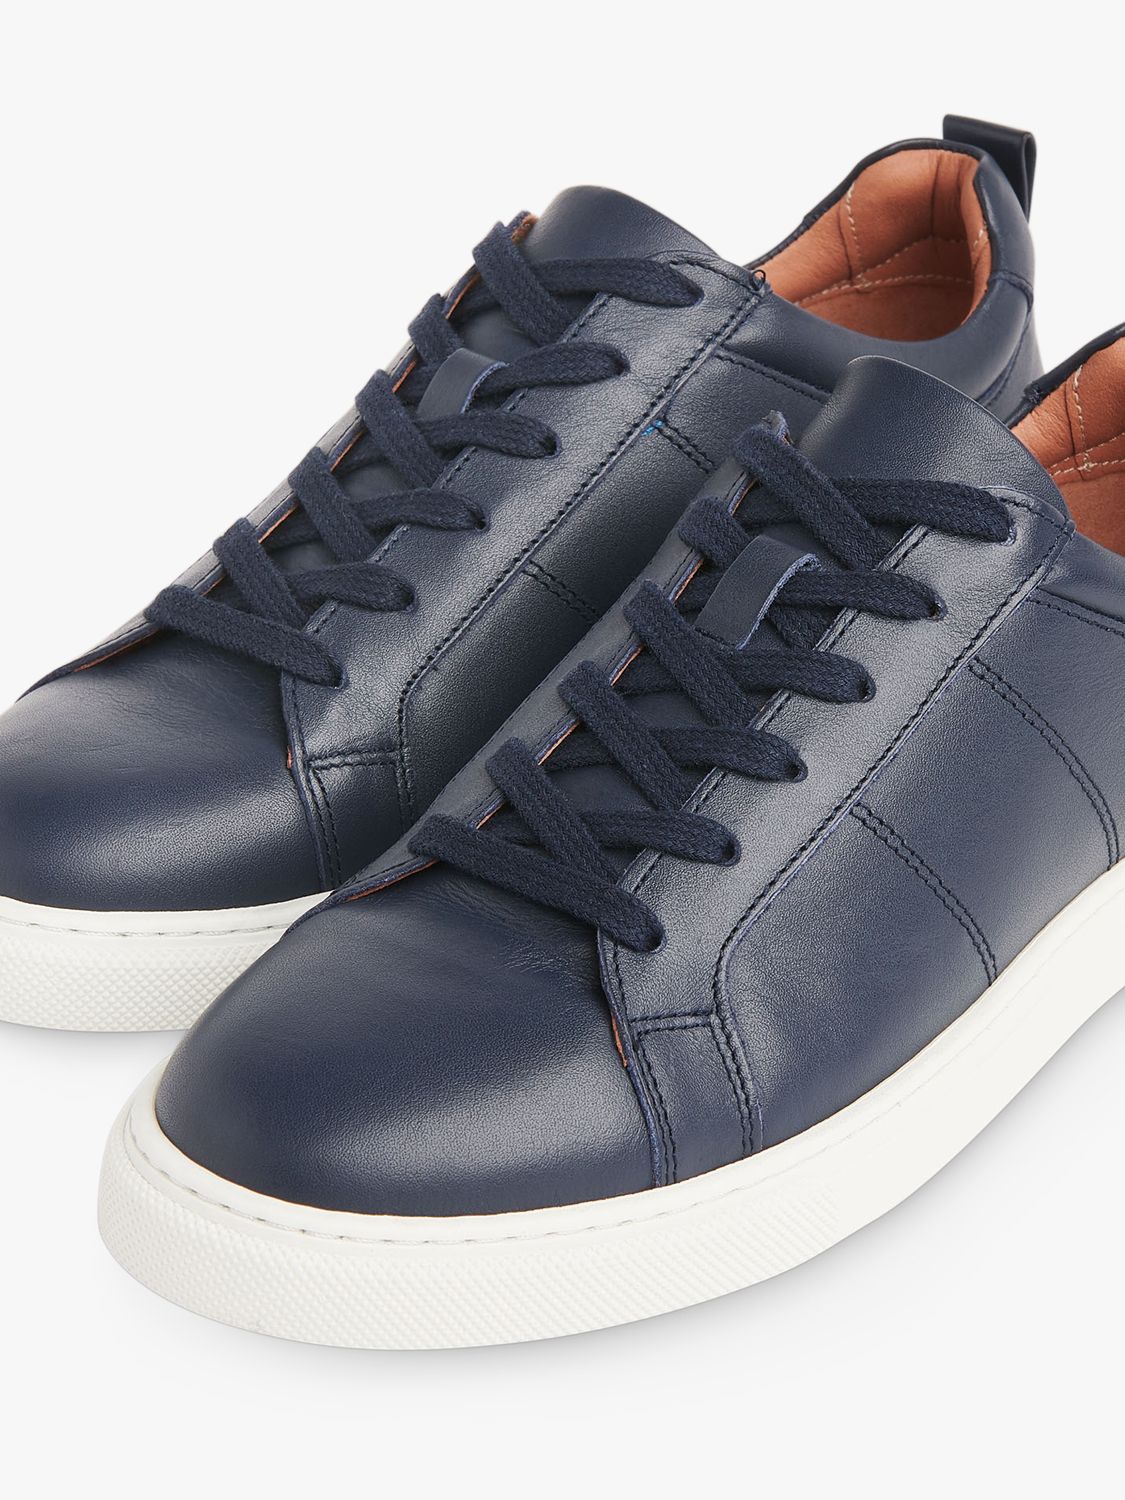 Whistles Koki Lace Up Leather Trainers, Navy at John Lewis & Partners